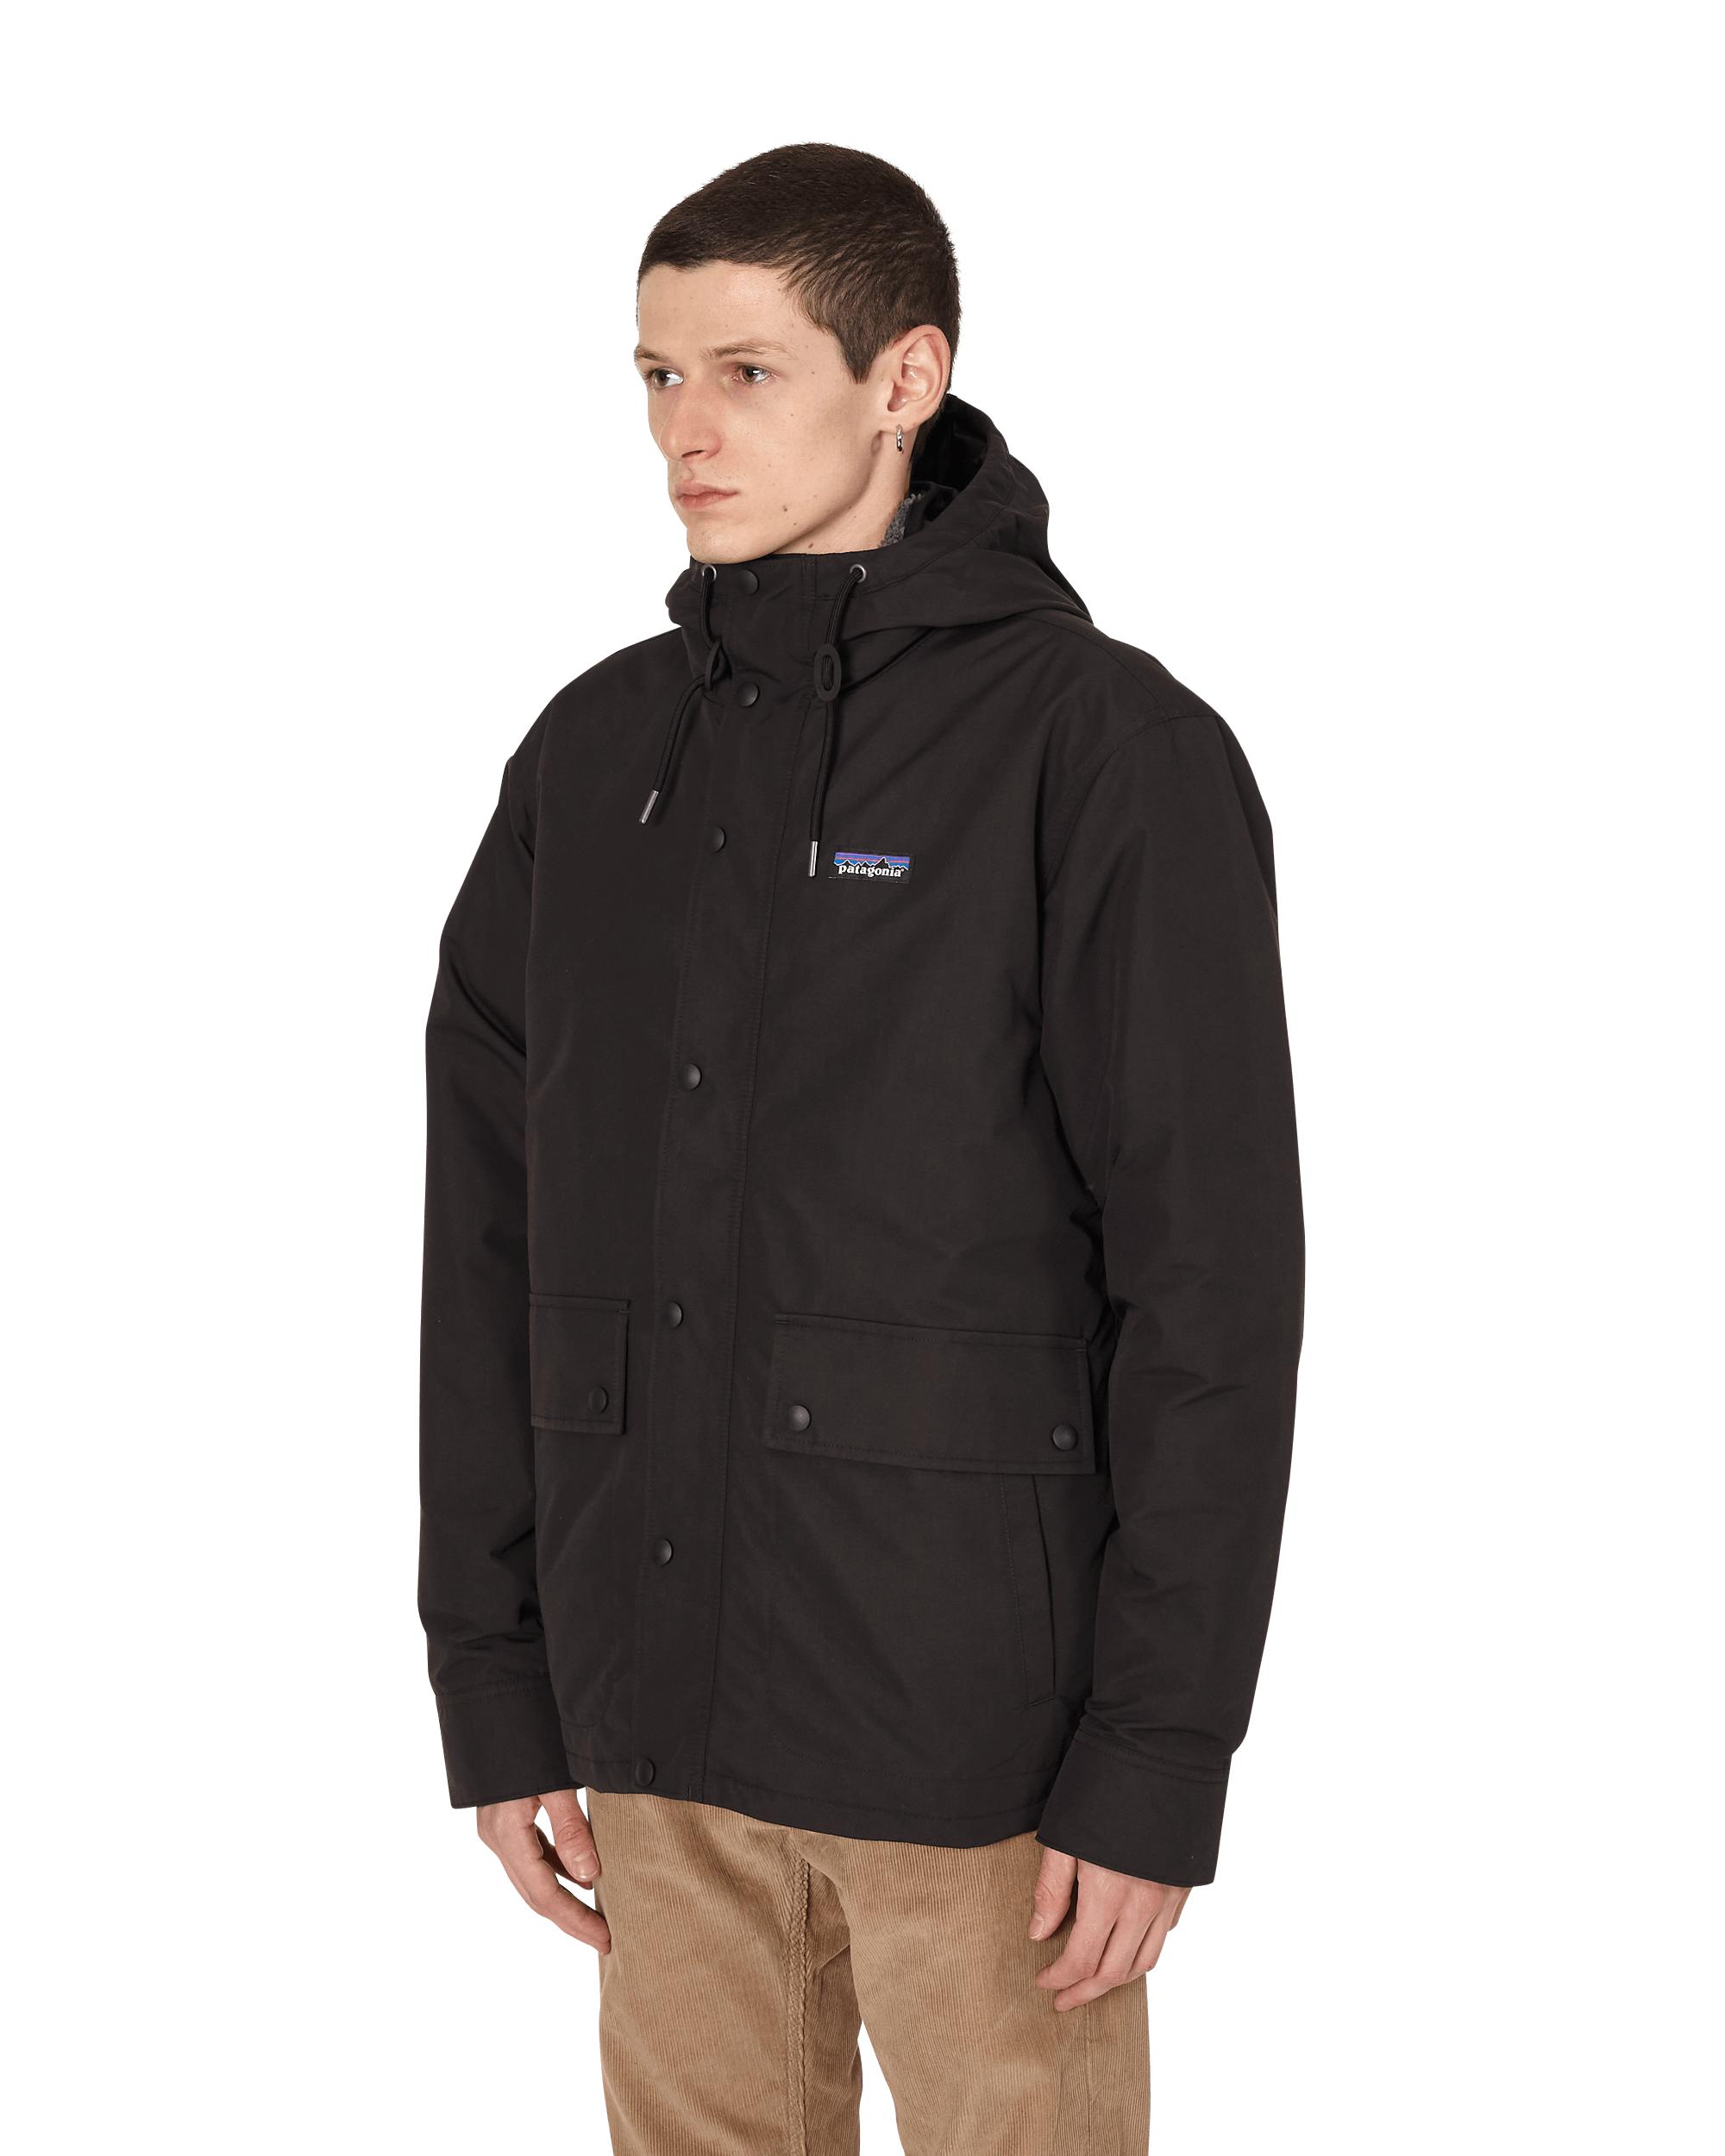 Patagonia Synthetic Isthmus 3-in-1 Jacket in Black for Men - Lyst